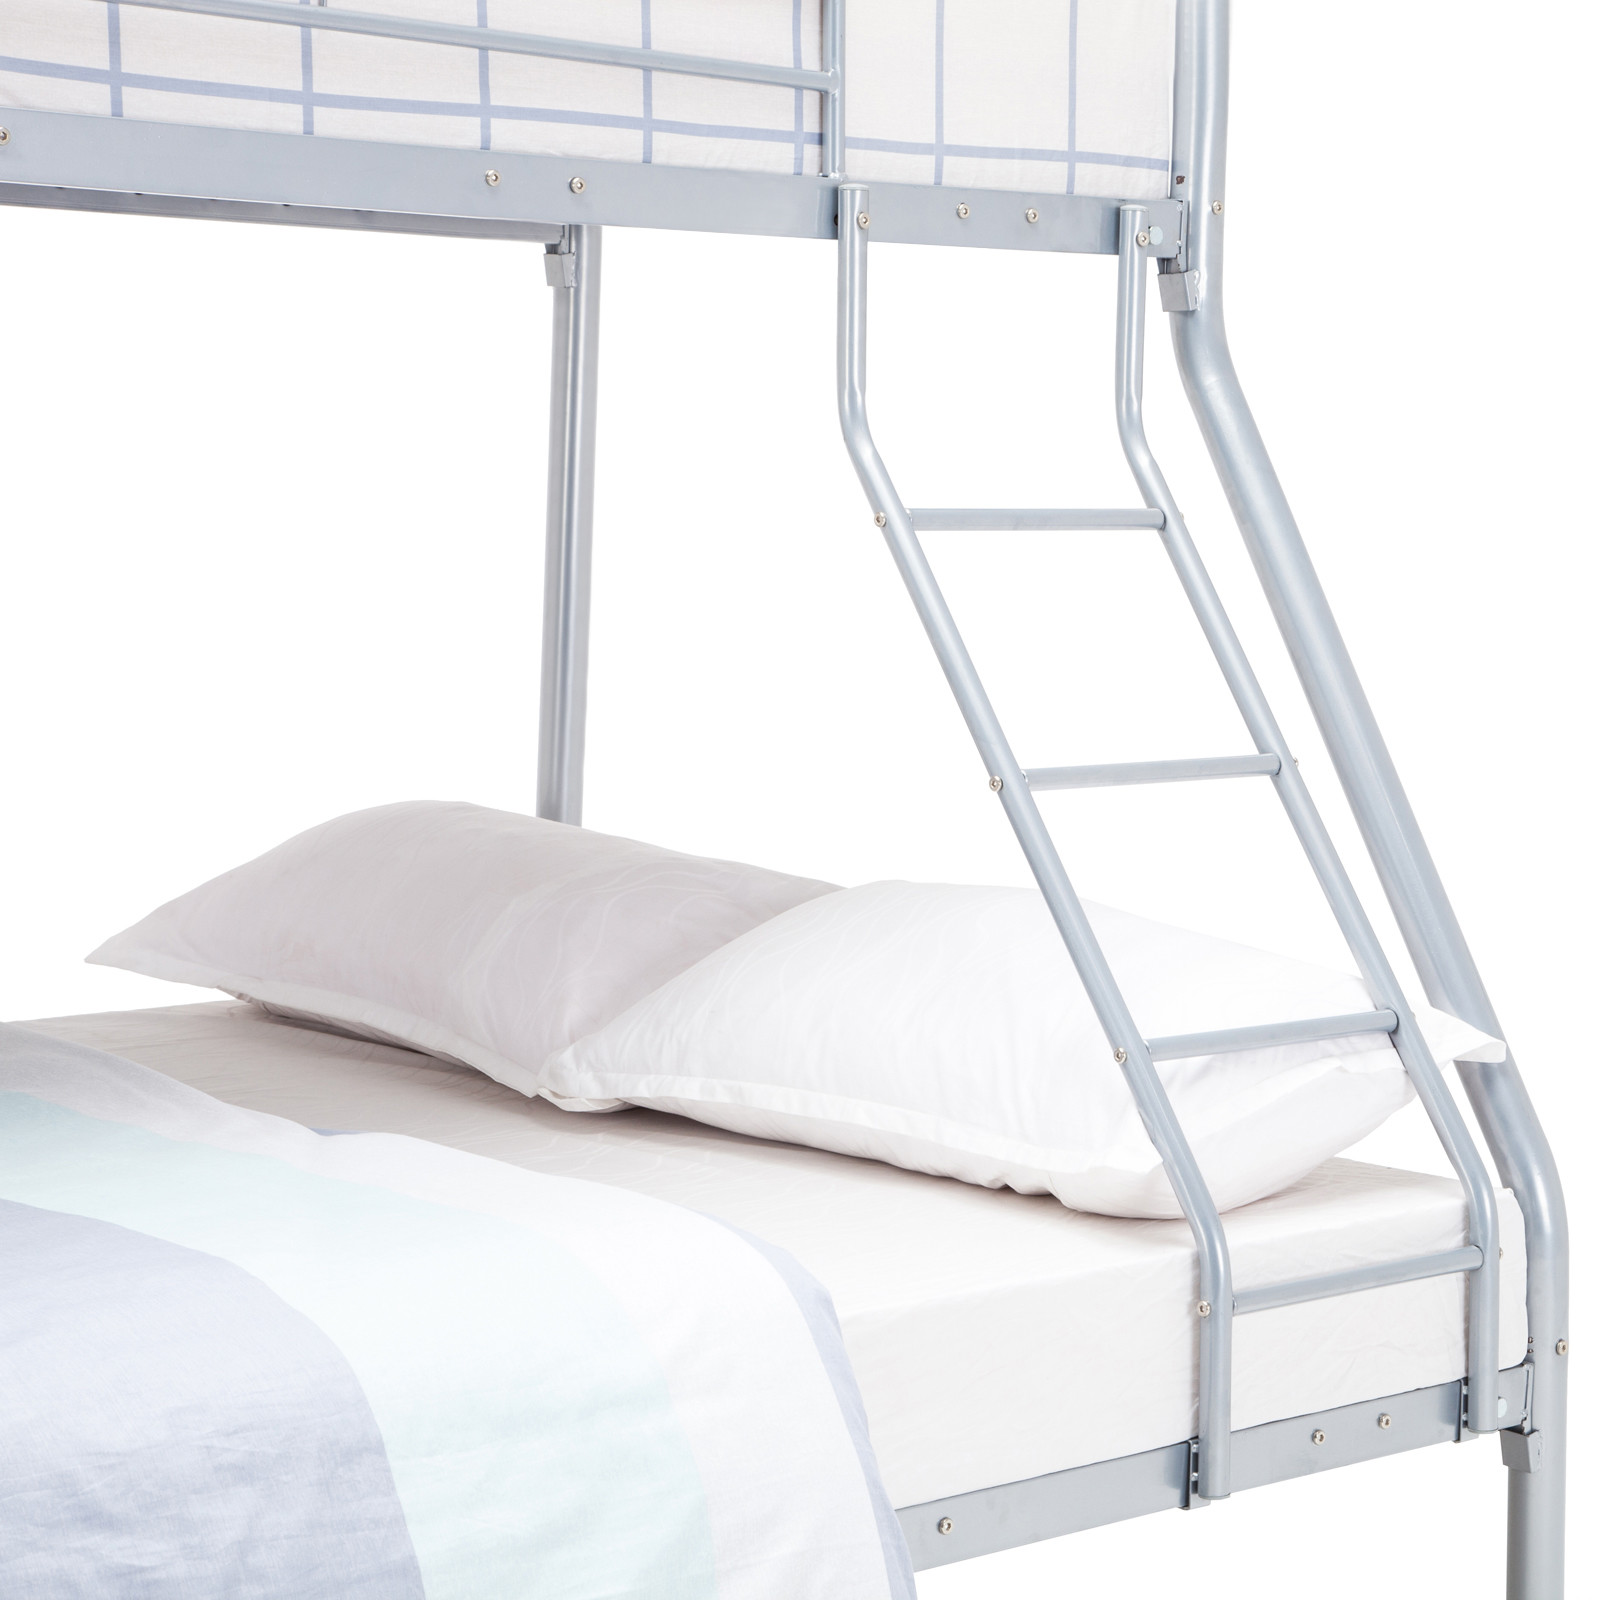 Custom Simple Strong Iron Bunk Beds Safety Protection For Compact Home